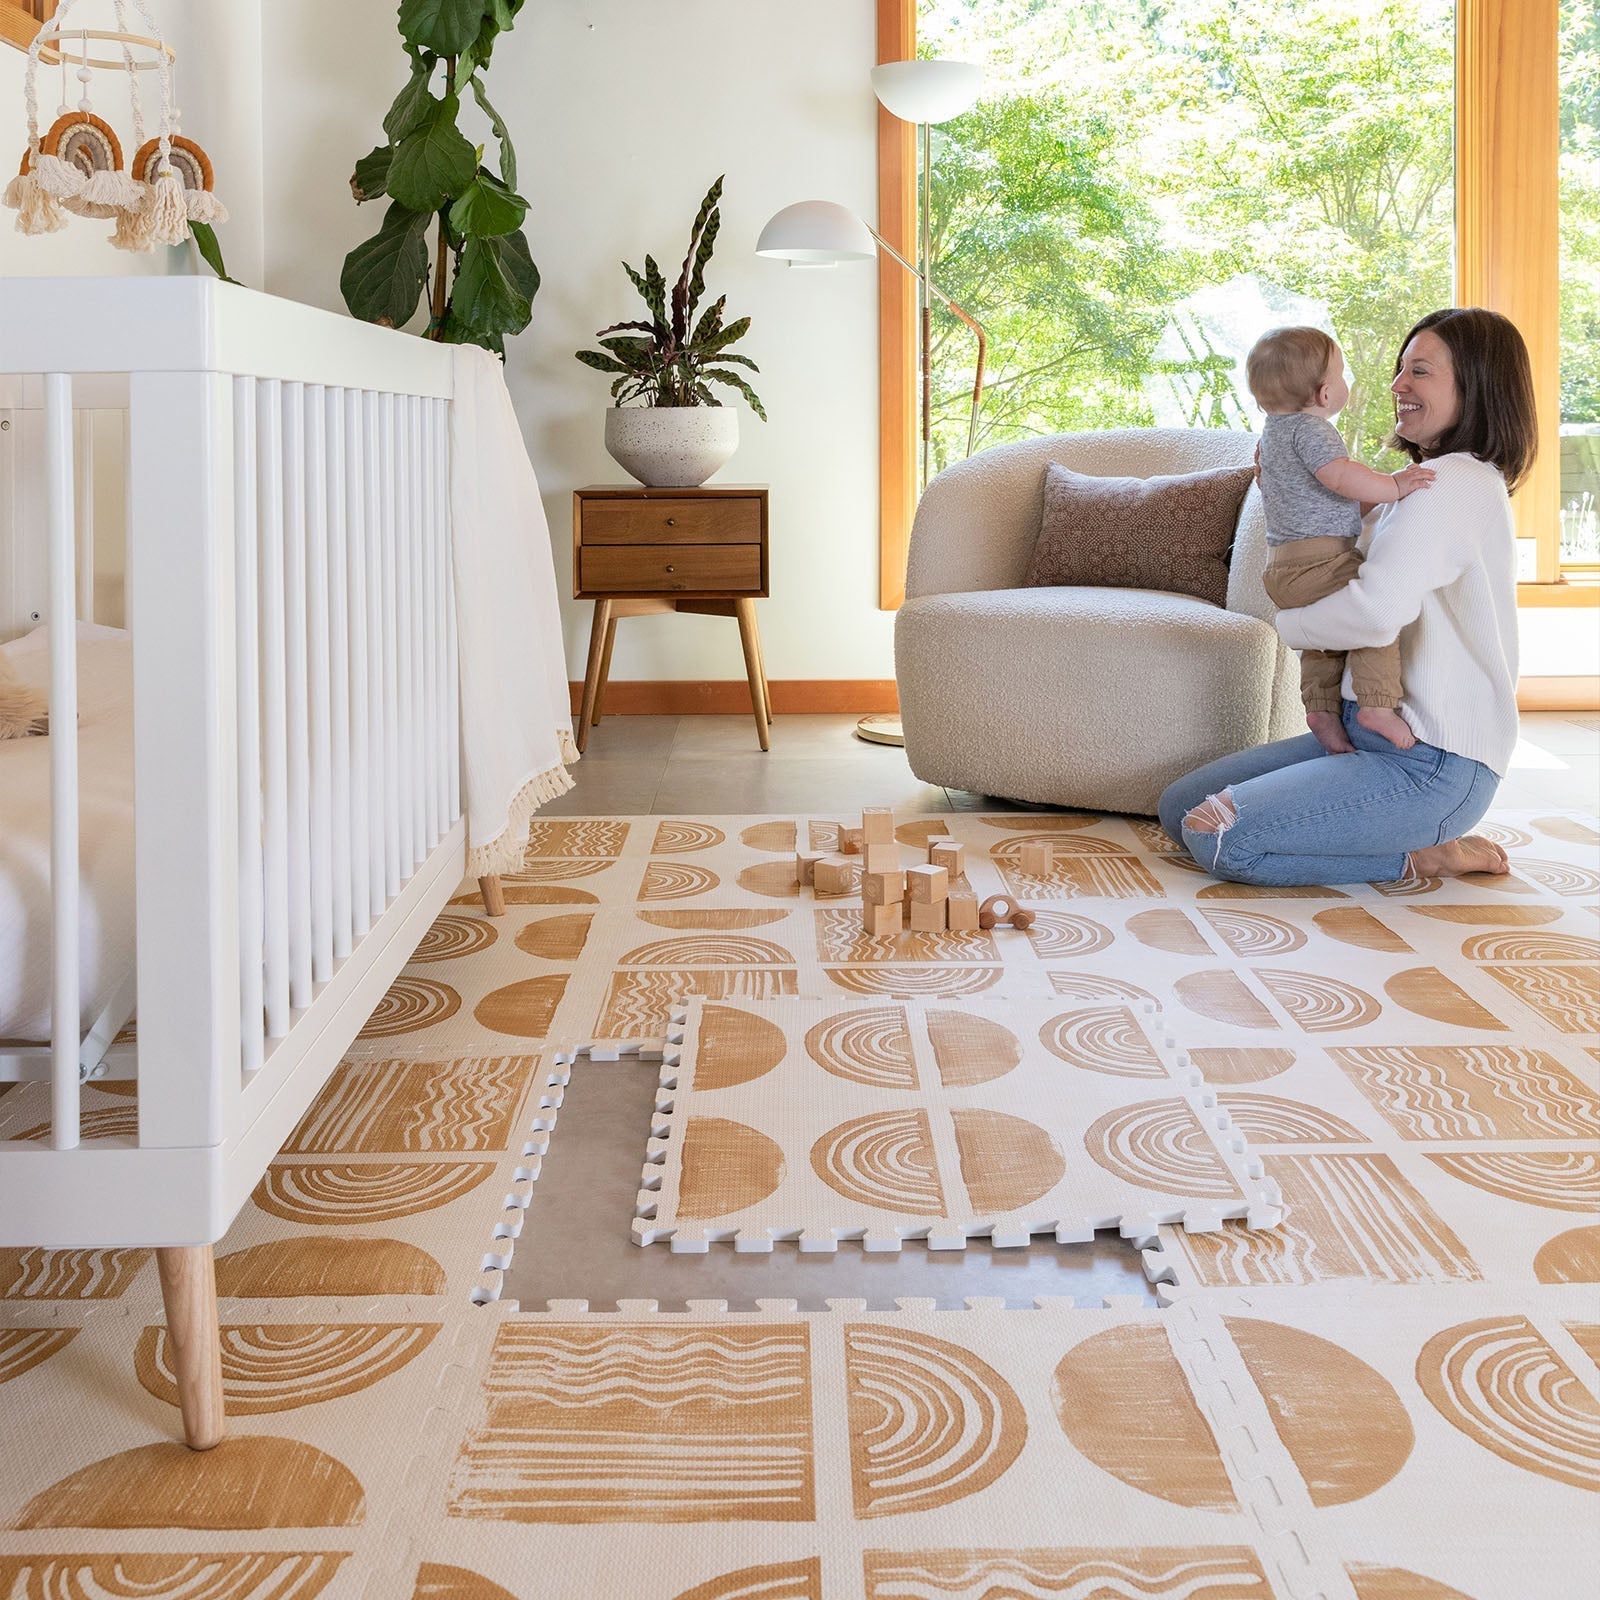 Ada modern minimalist baby play mat in Sunflower, mustard yellow and off white. Shown in a nursery with one tile lifted in the center and Mom and baby playing.